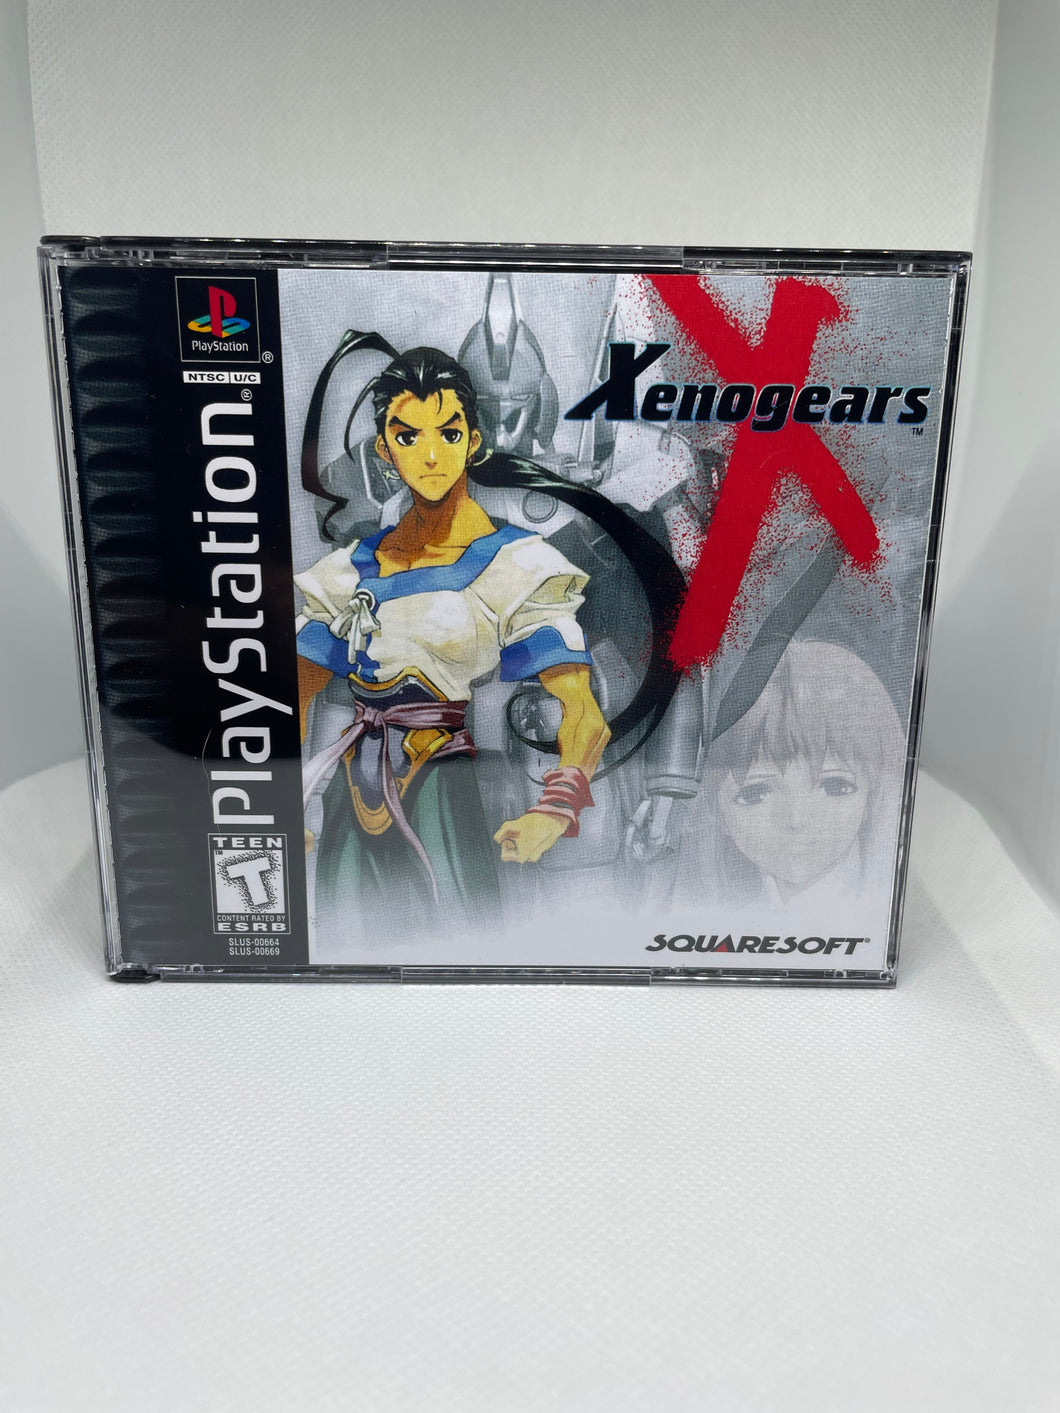 Xenogears PS1 Reproduction Case